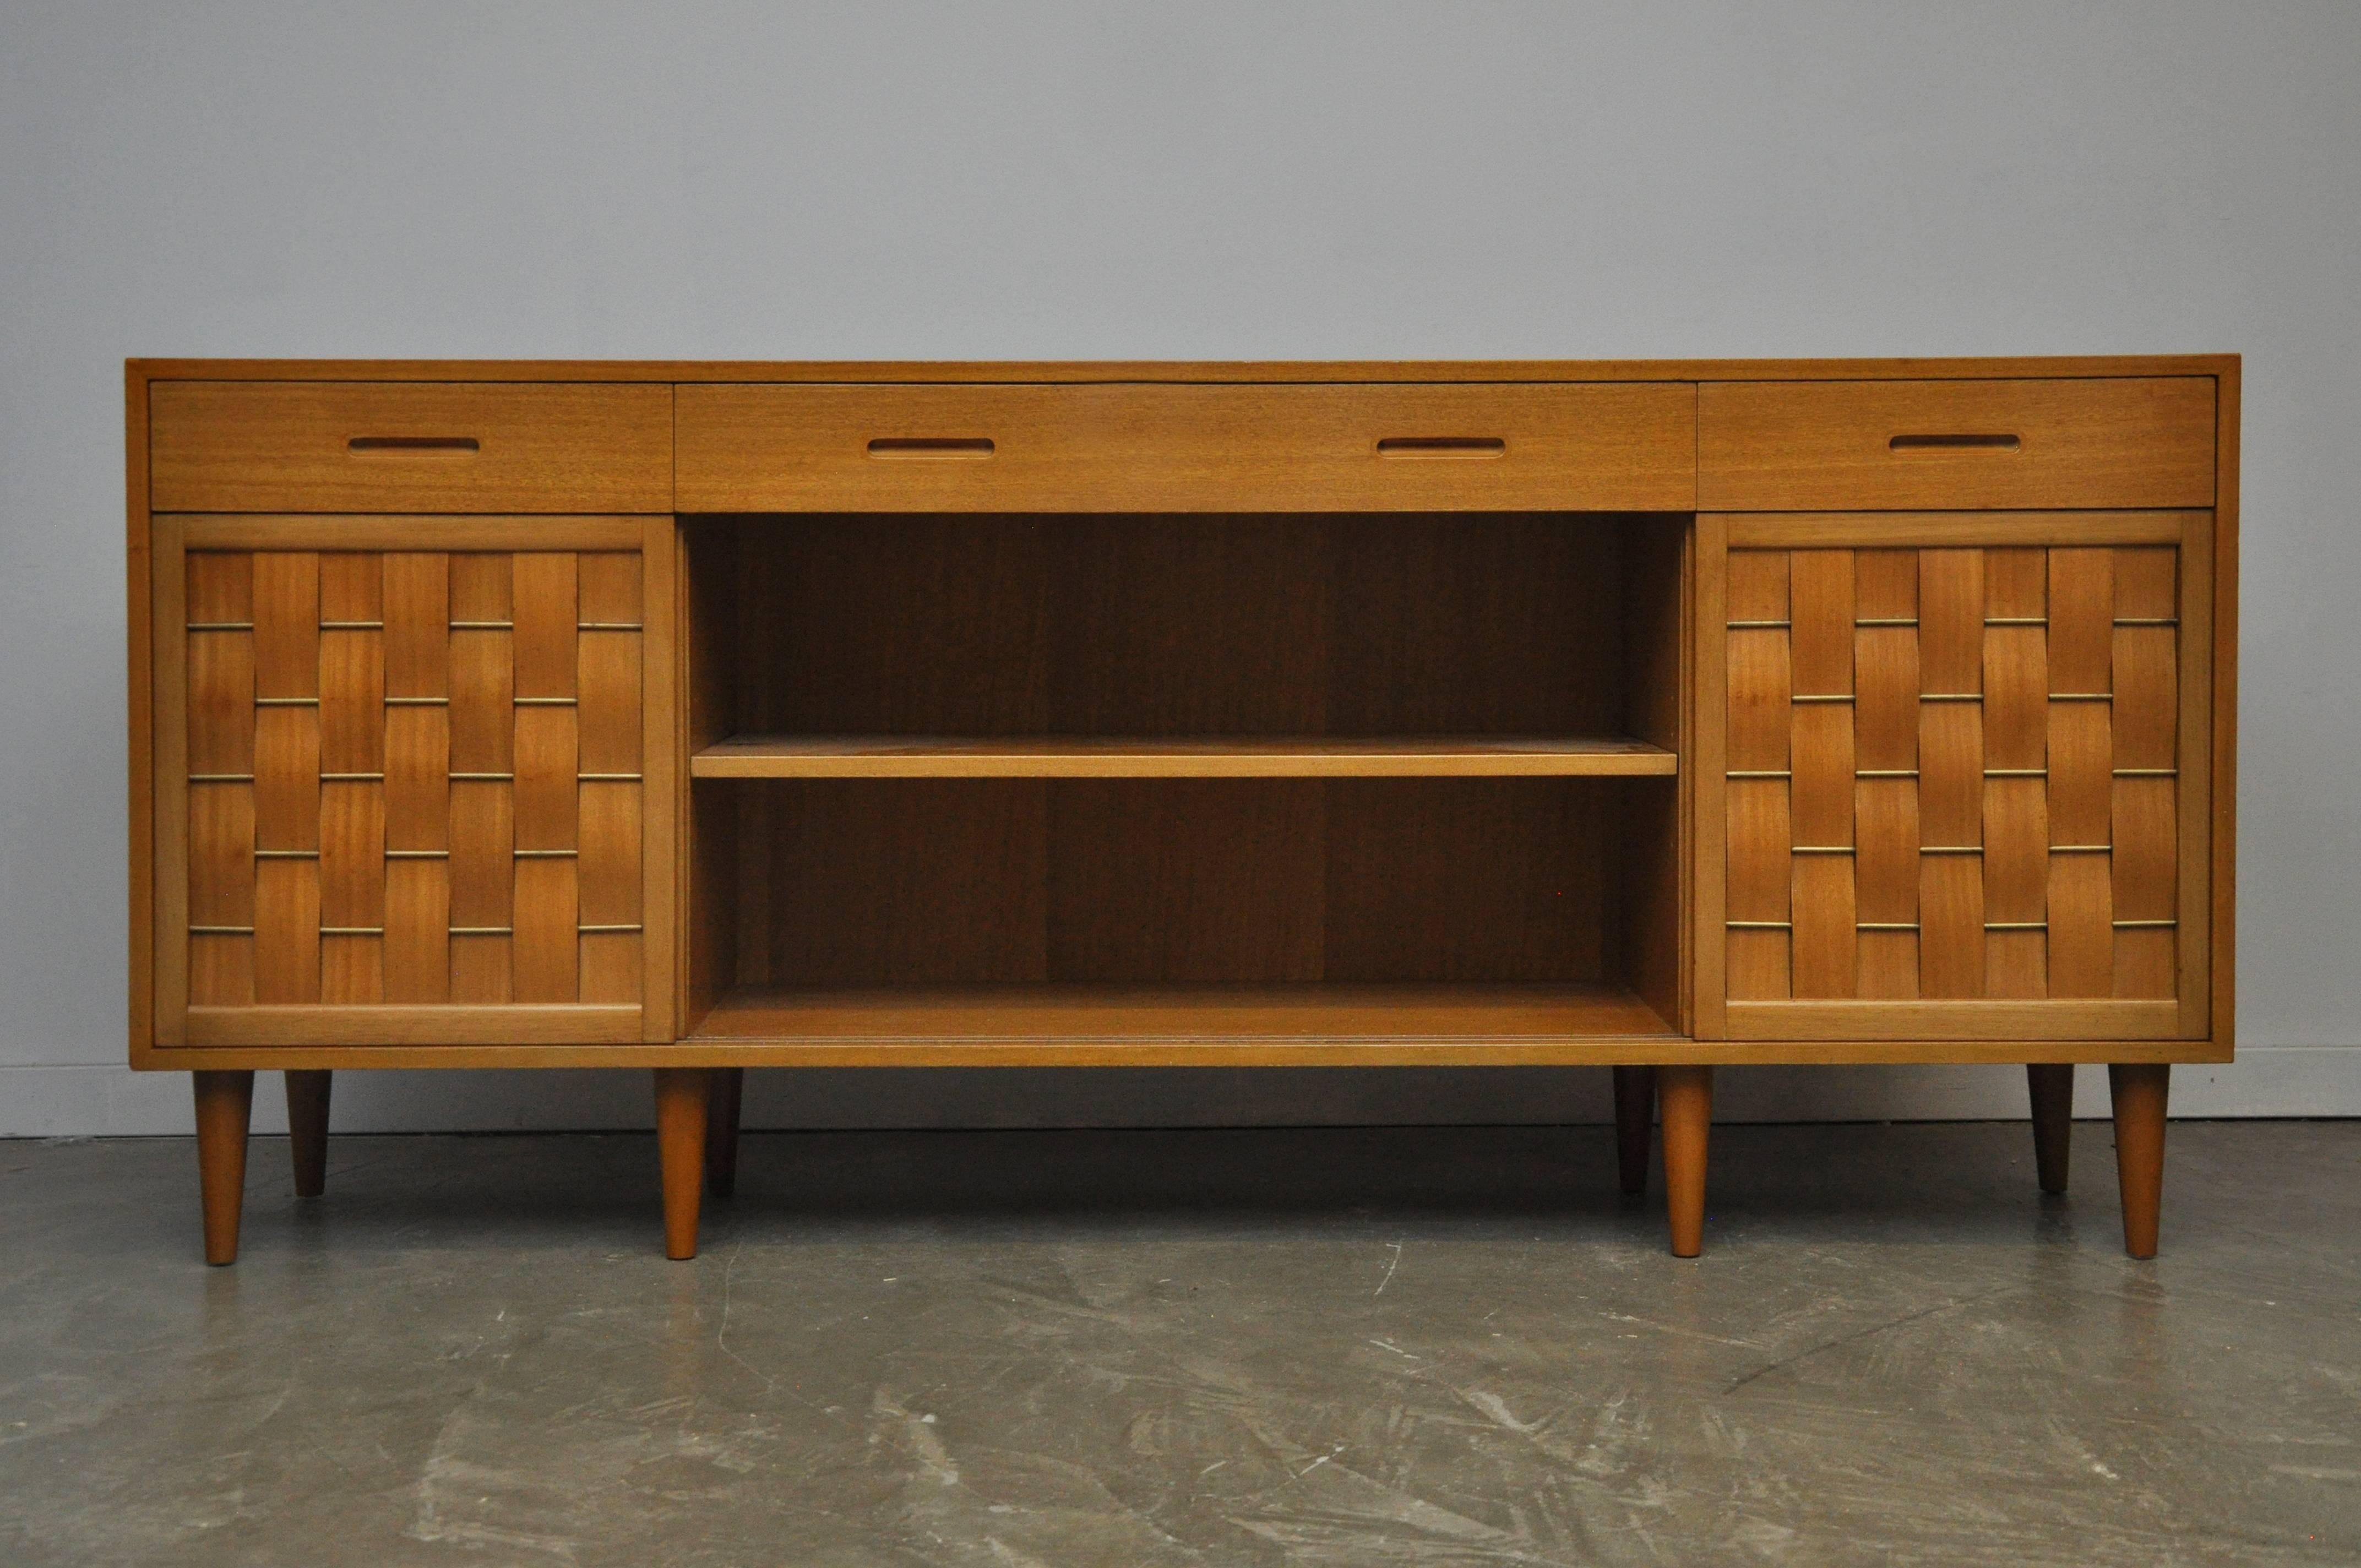 Large four-door sideboard designed by Edward Wormley for Dunbar. Model #5668. Mahogany case with brass details on doors. Four sliding doors.